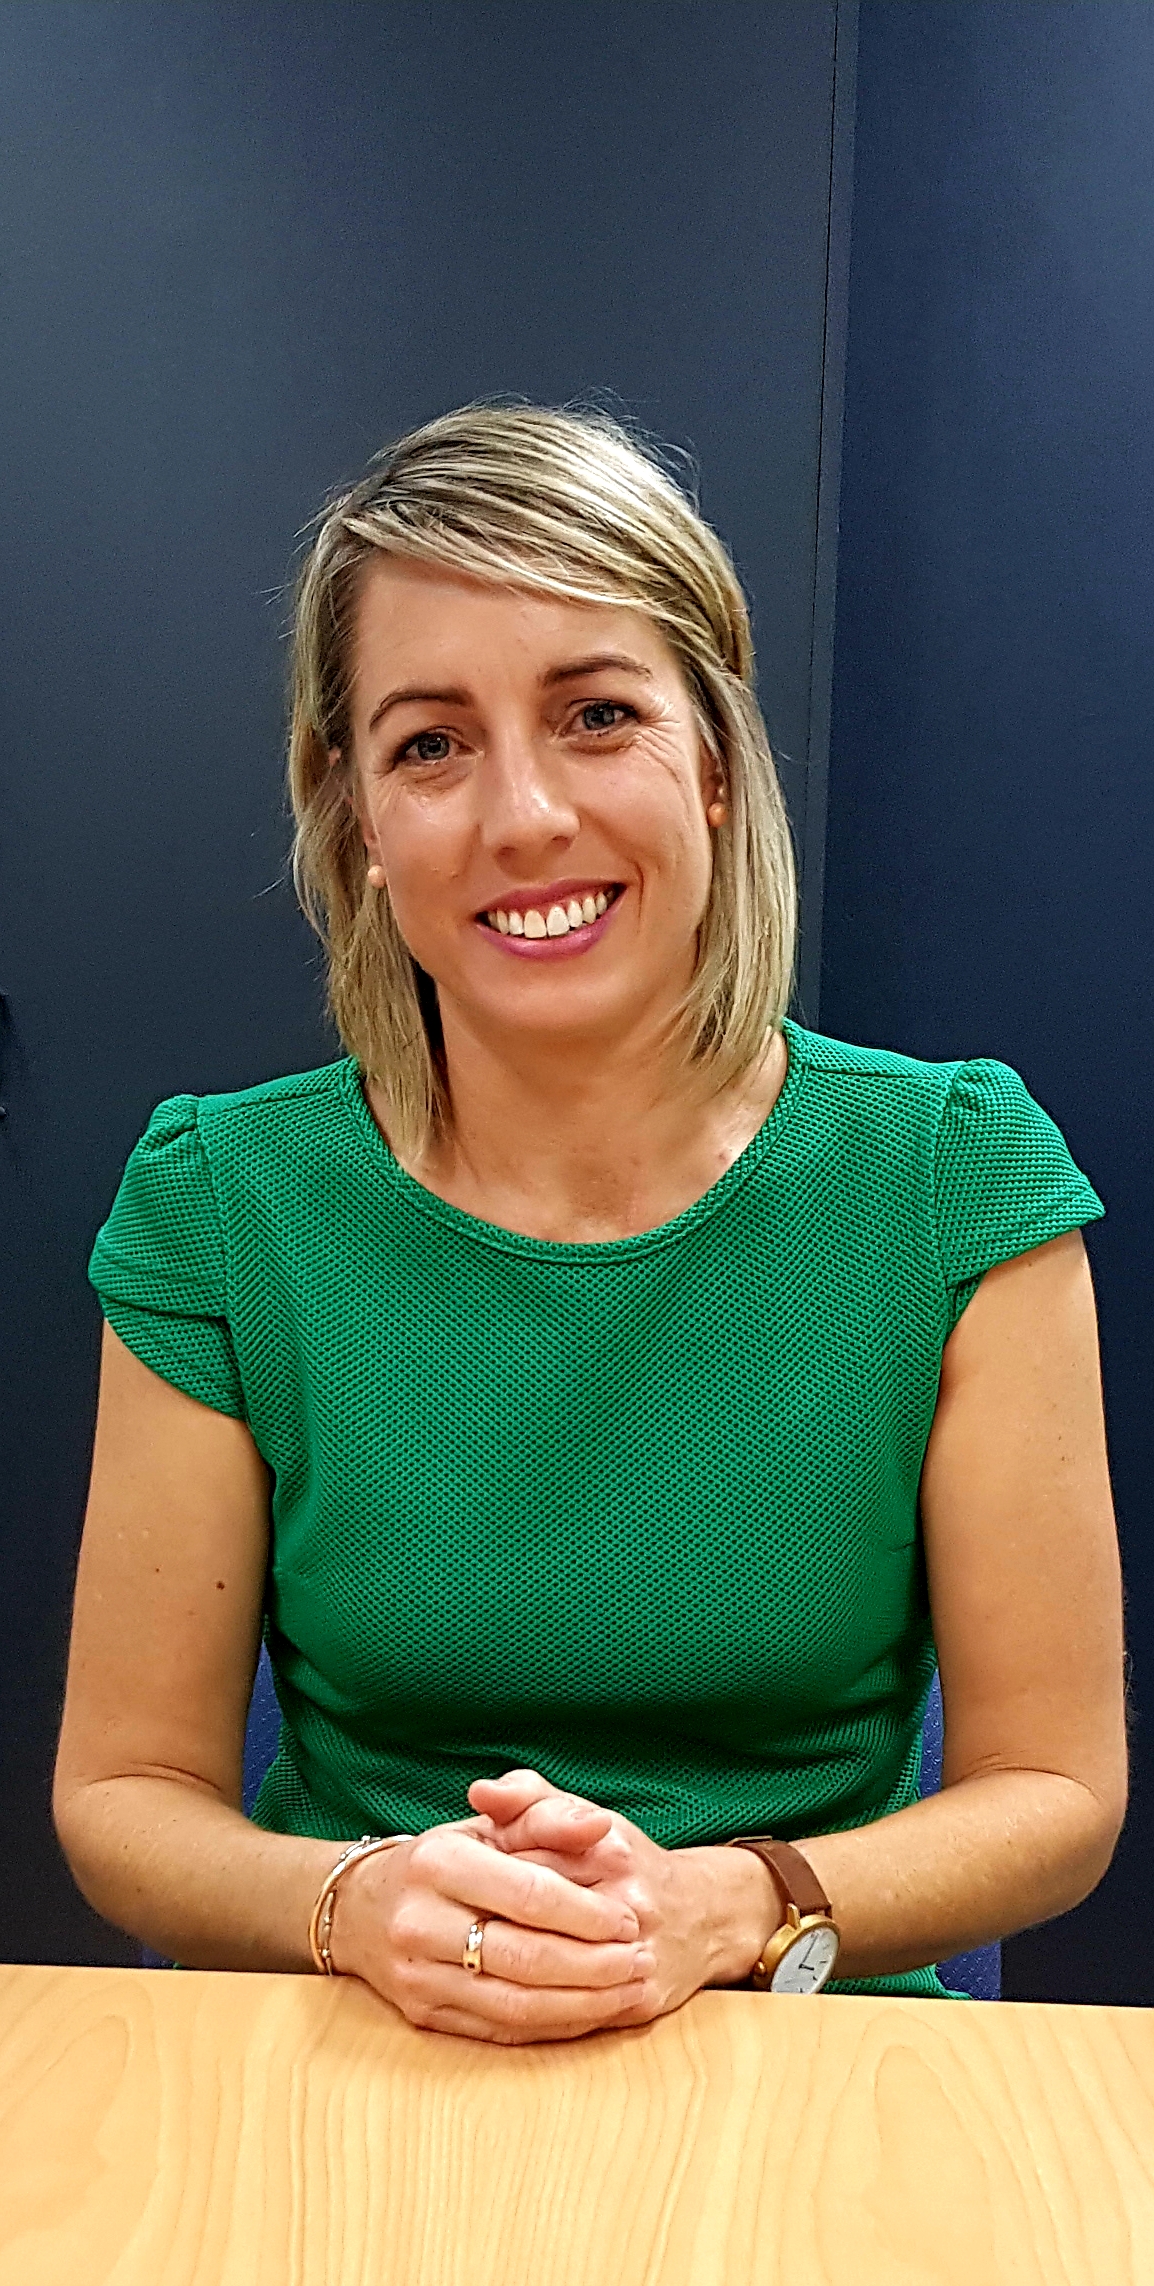 Clare Morgan, a woman with blonde hair, wearing a green top